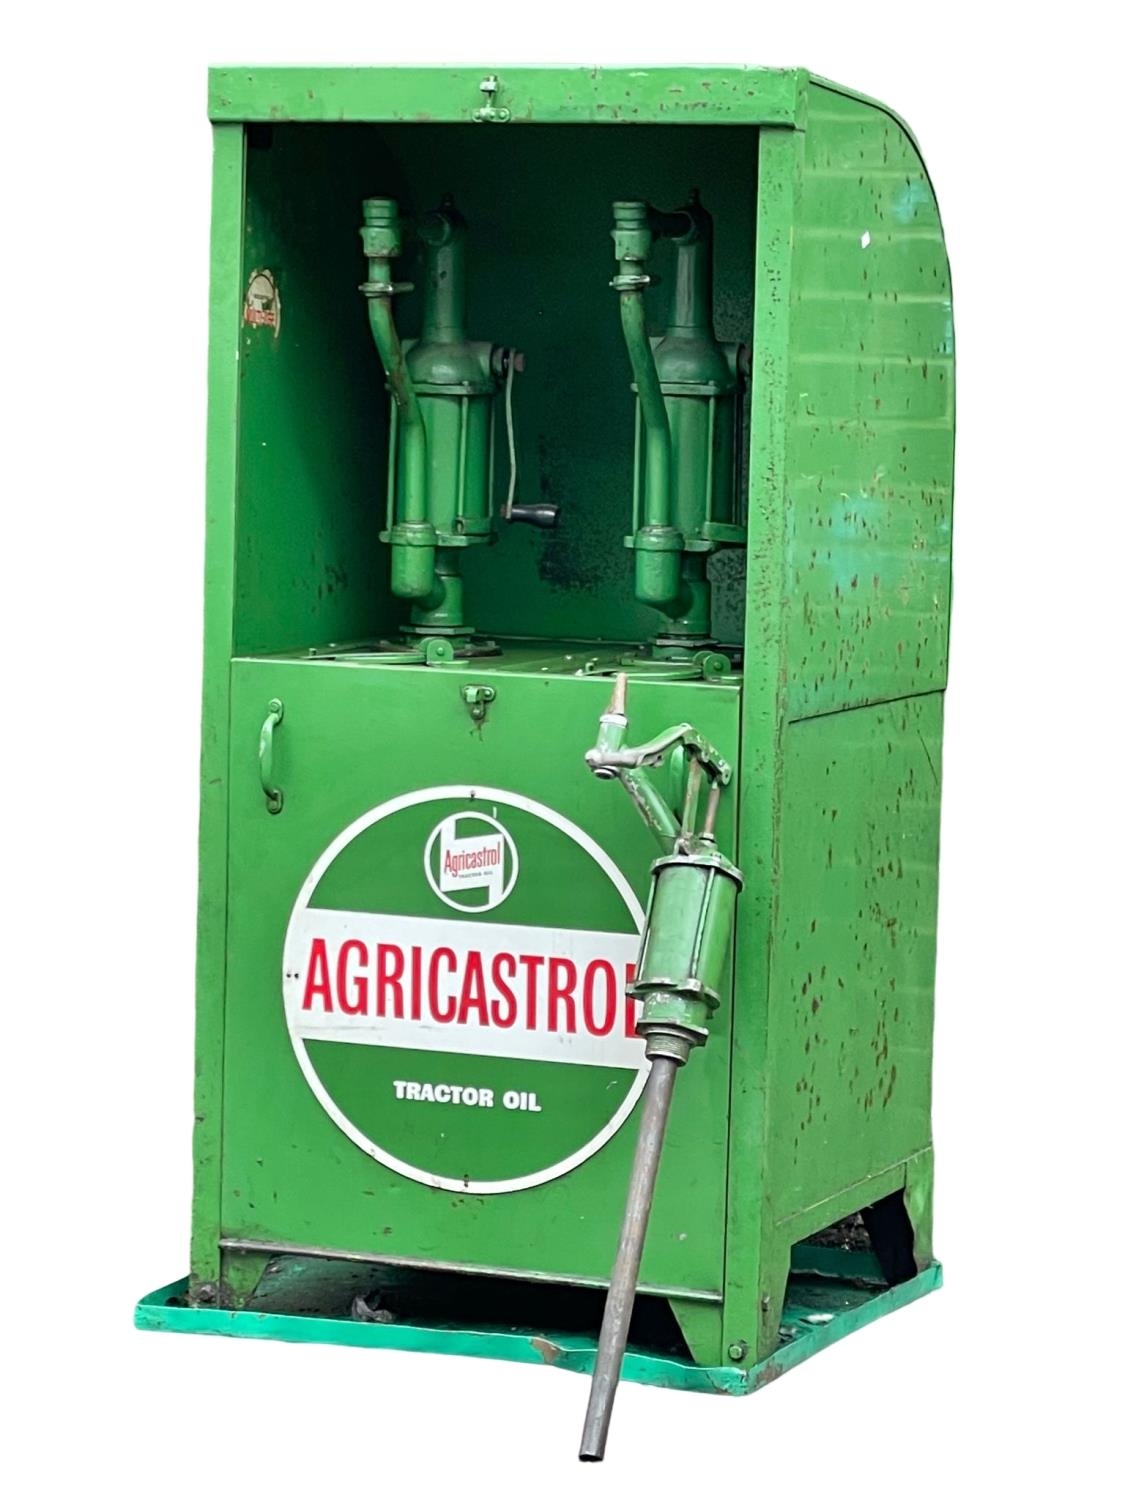 A large Agricastrol Tractor Oil dispenser 69x63x141cm.